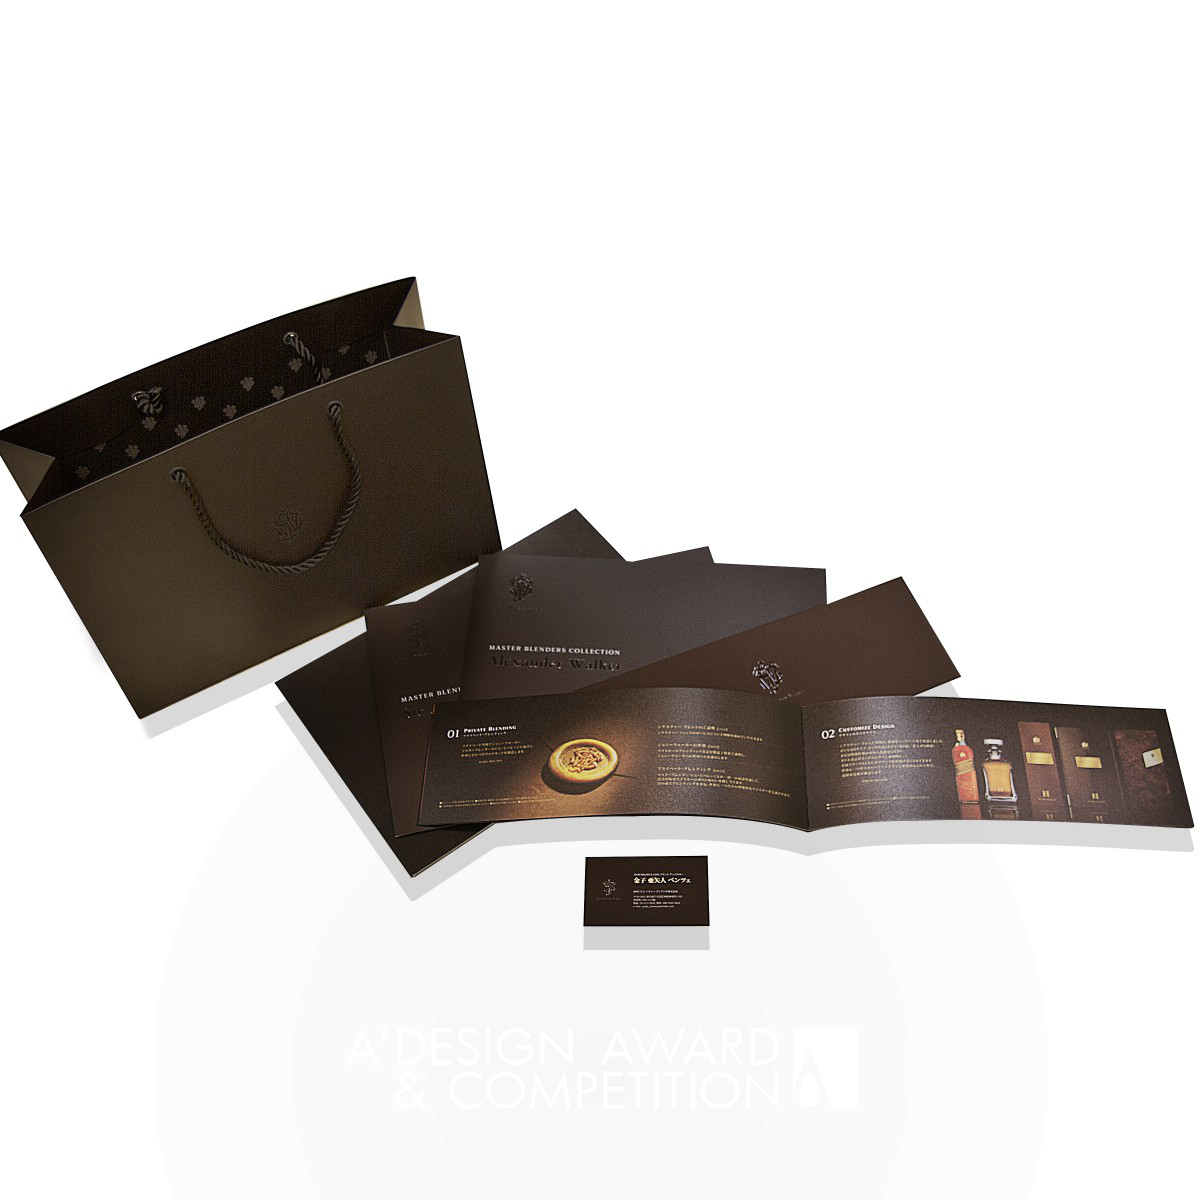 JOHNNIE WALKER signature blend Collateral materials by E-graphics communications